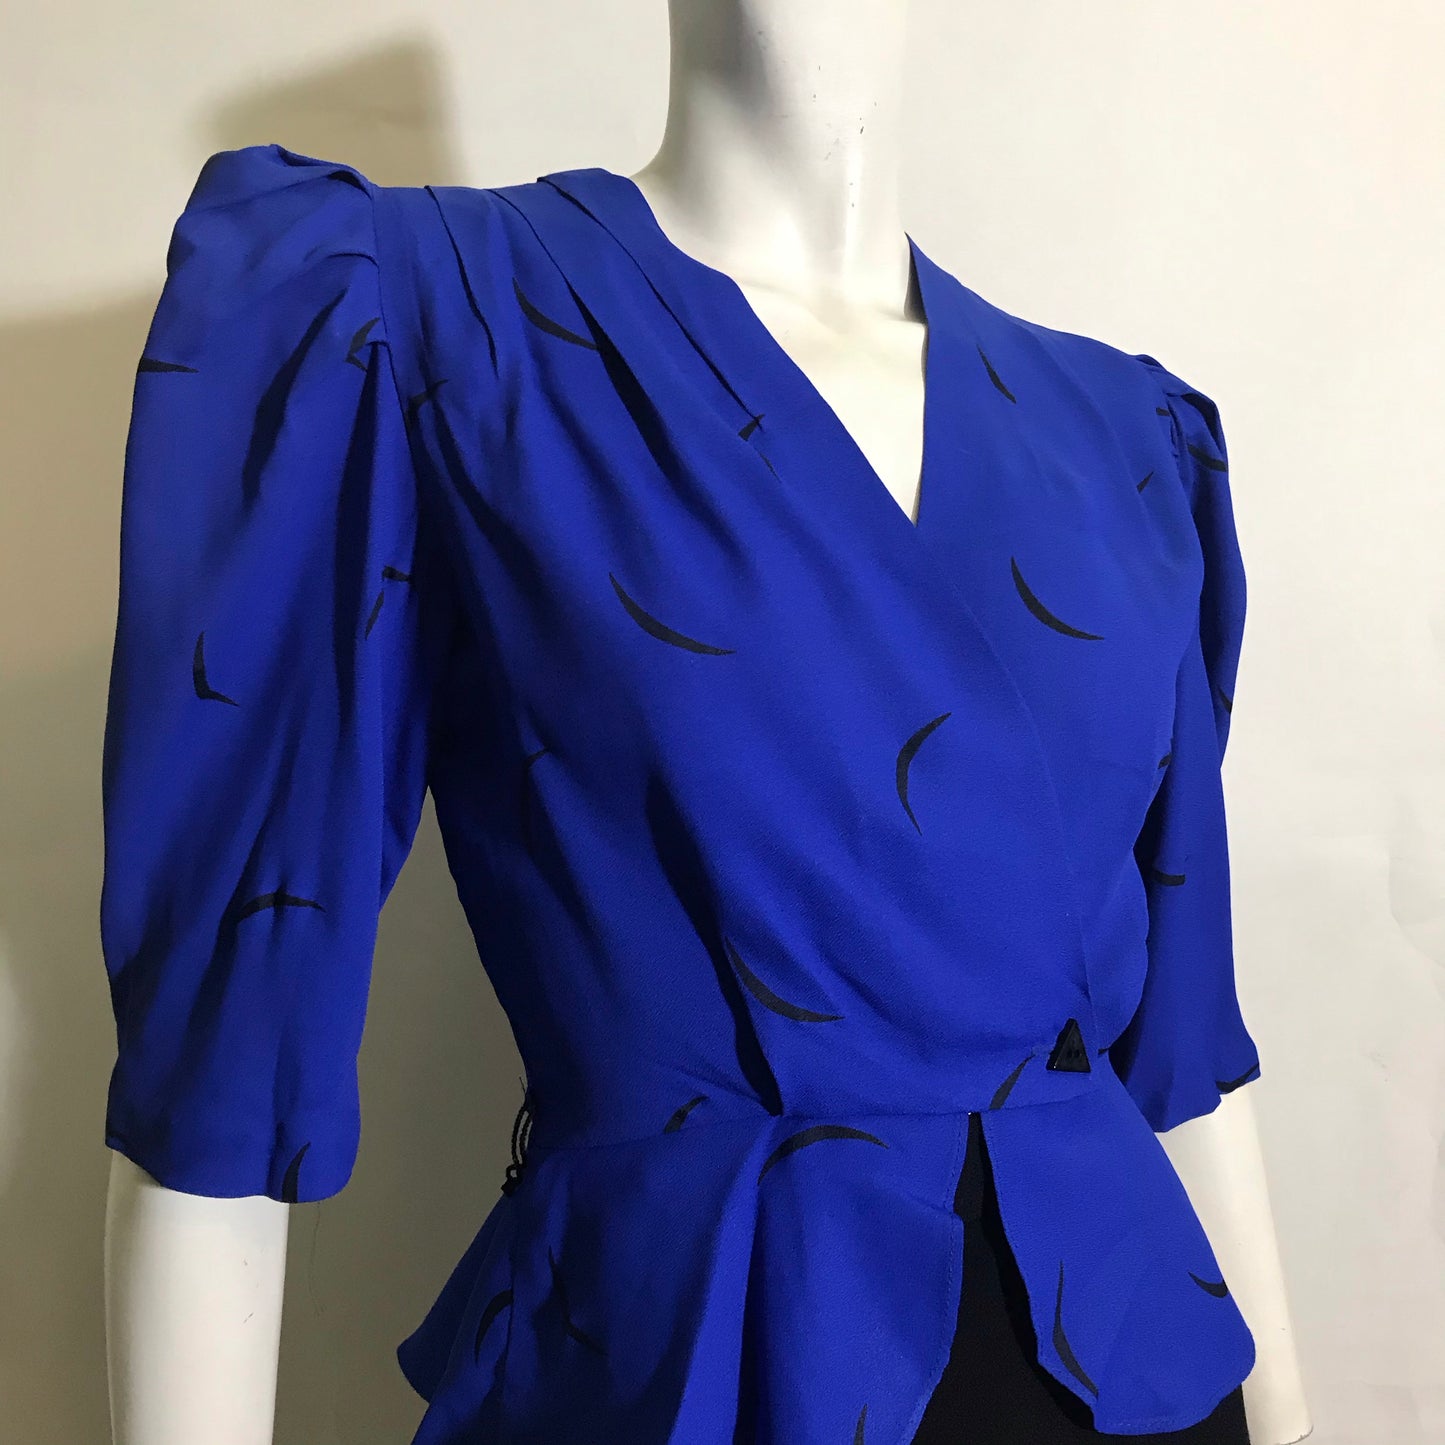 Blade Runner Chic Black and Blue Suit Dress with Peplum circa 1980s